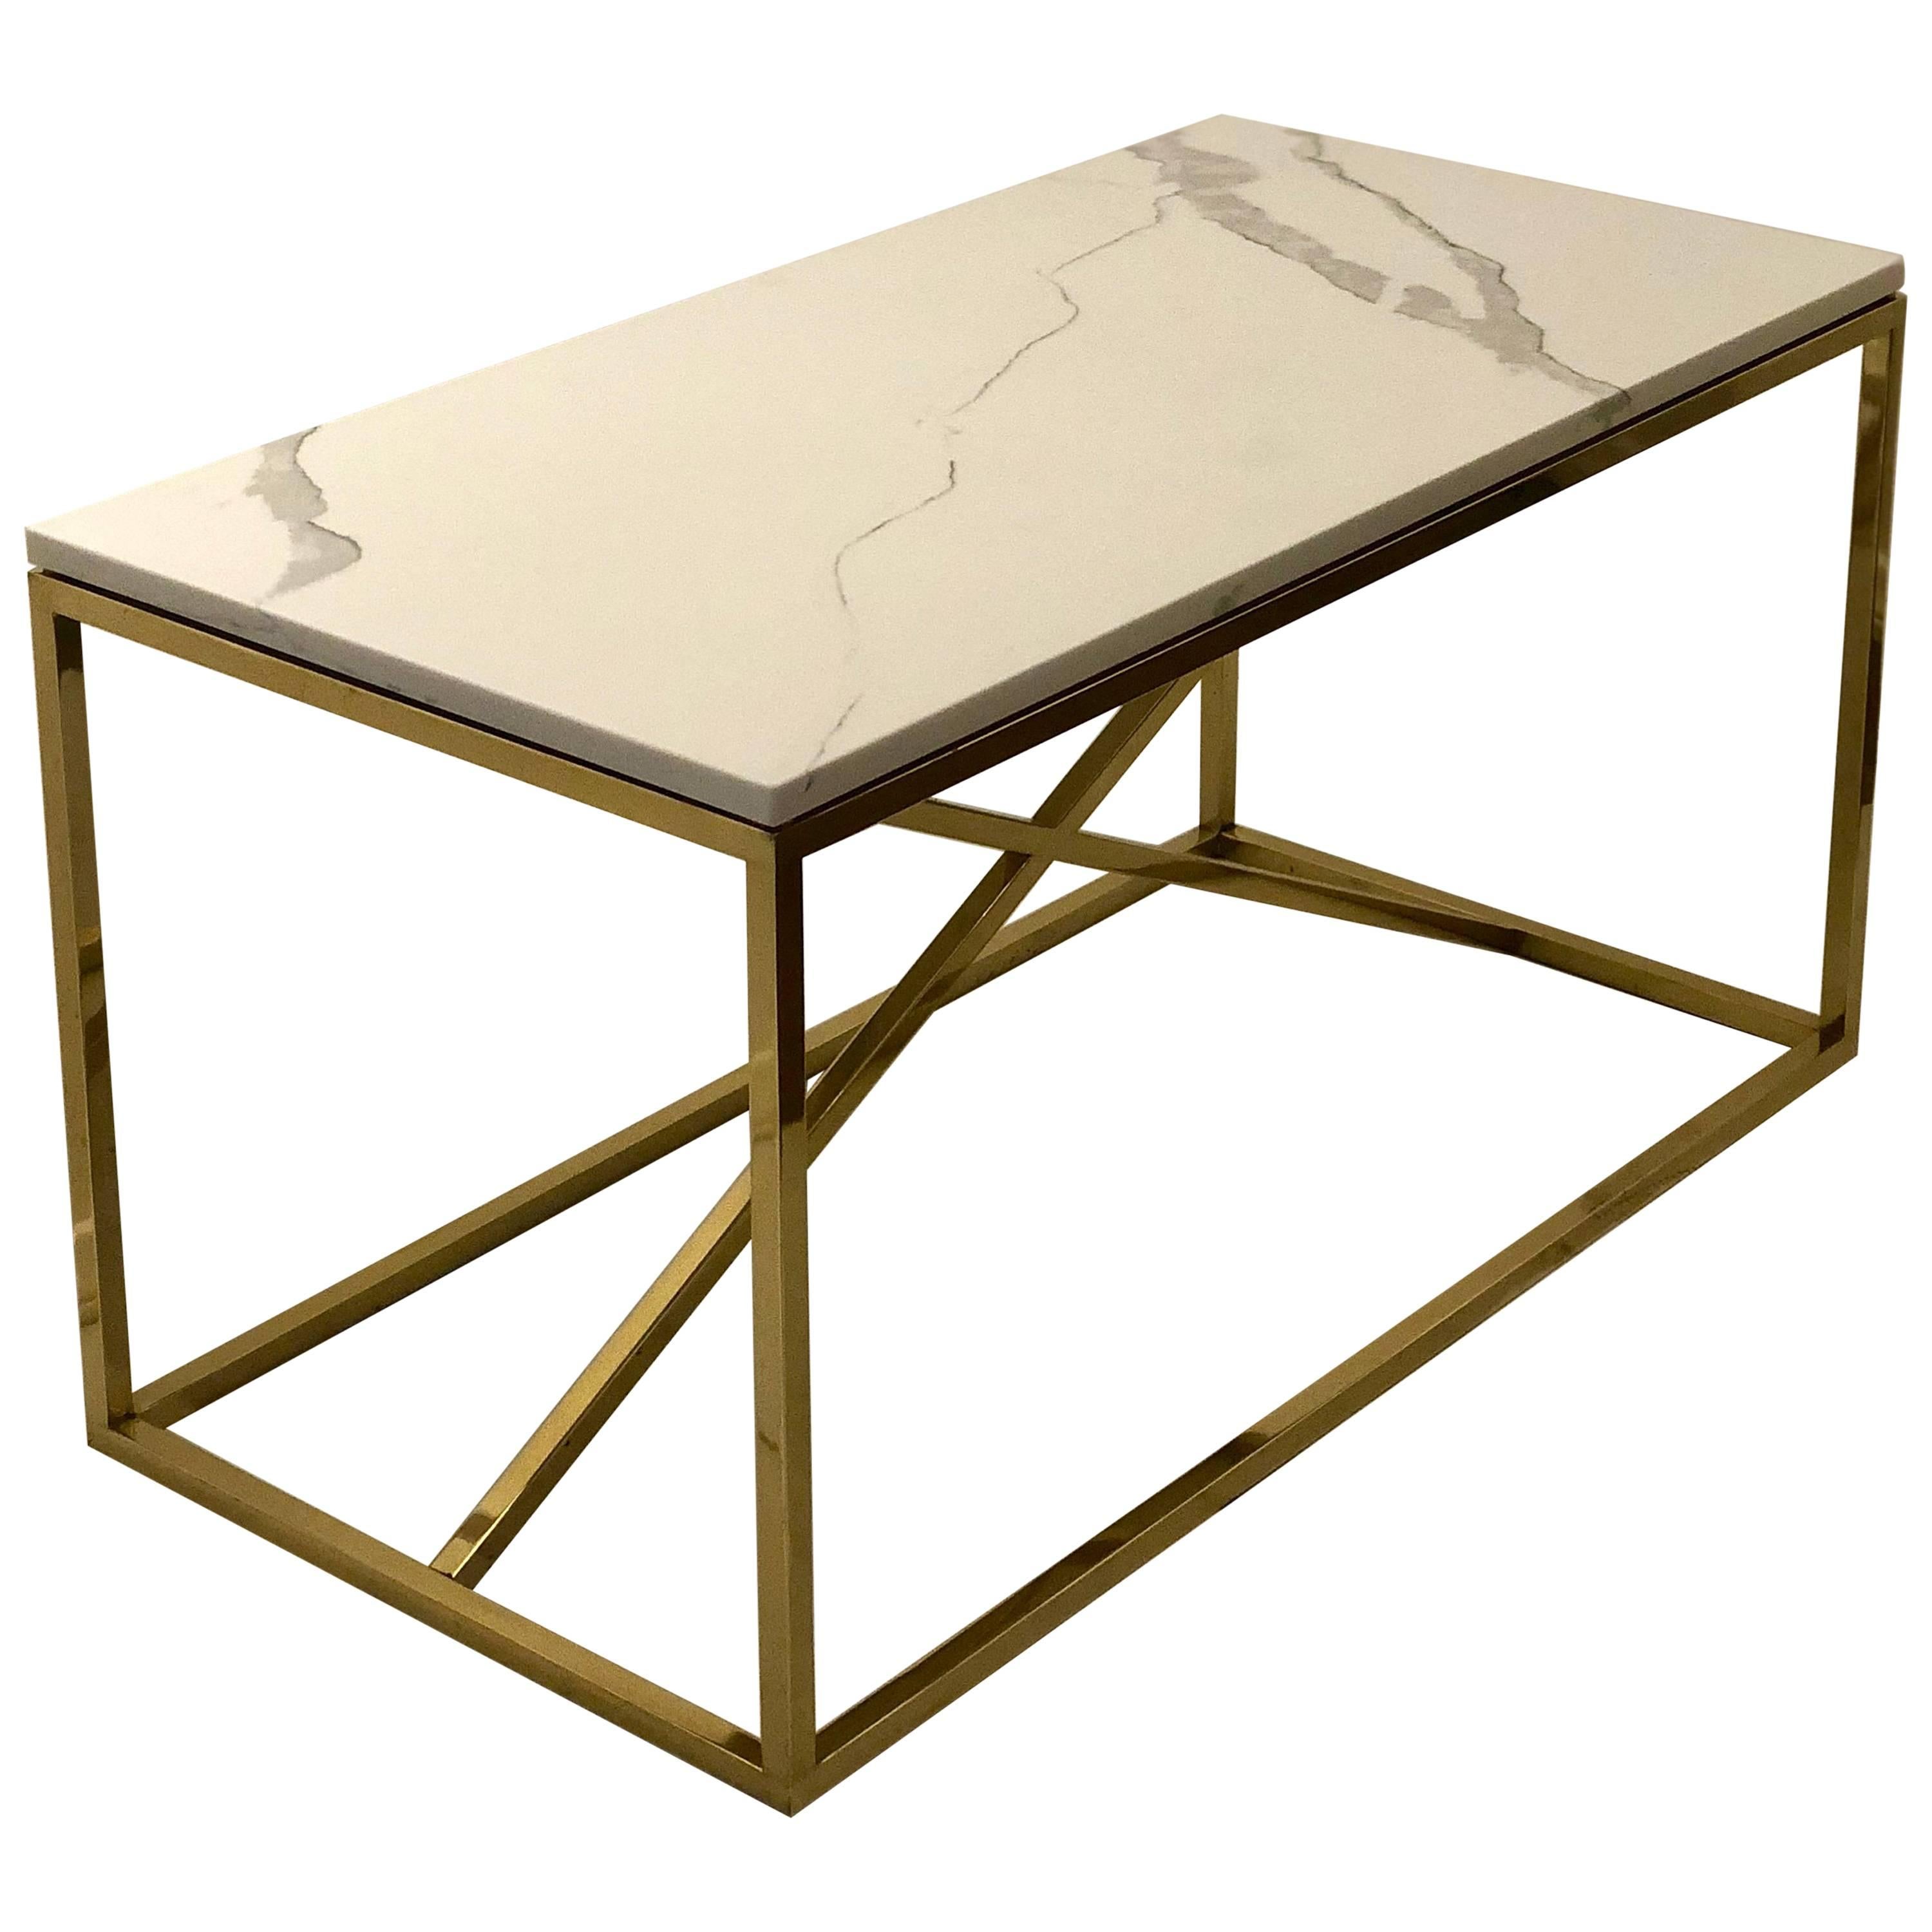 Striking Polished Brass and Marble Coffee Table x Base